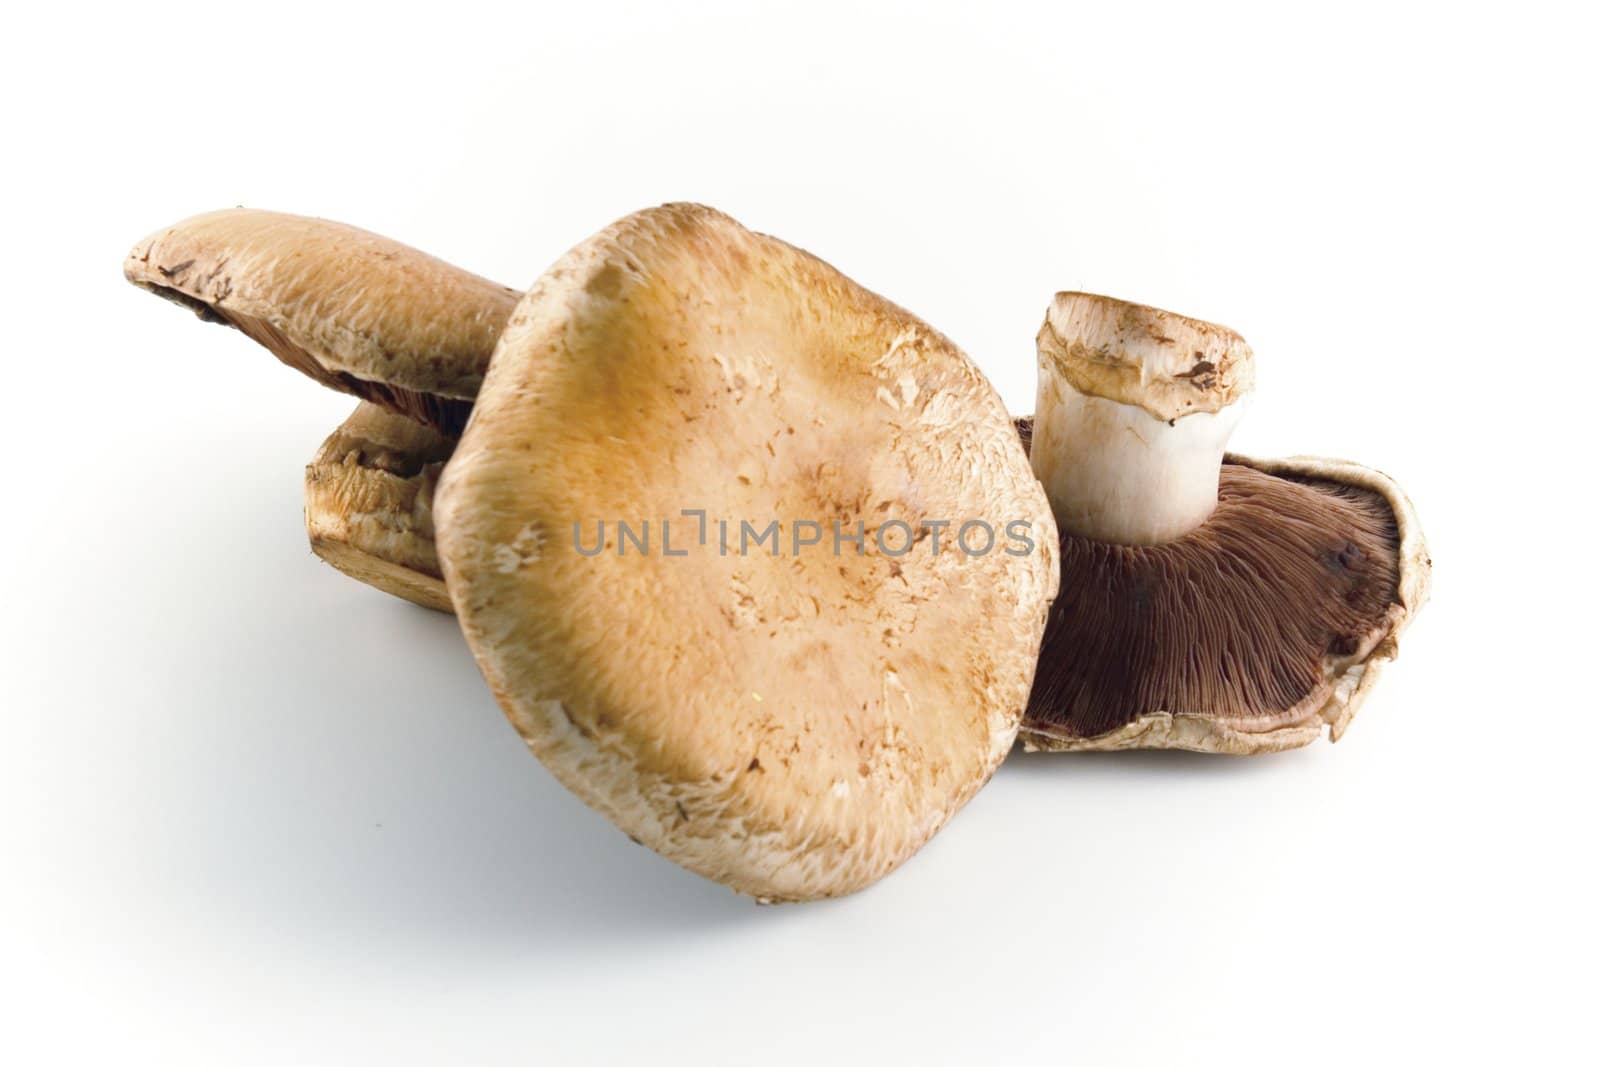 Wood edible mushrooms on a white background